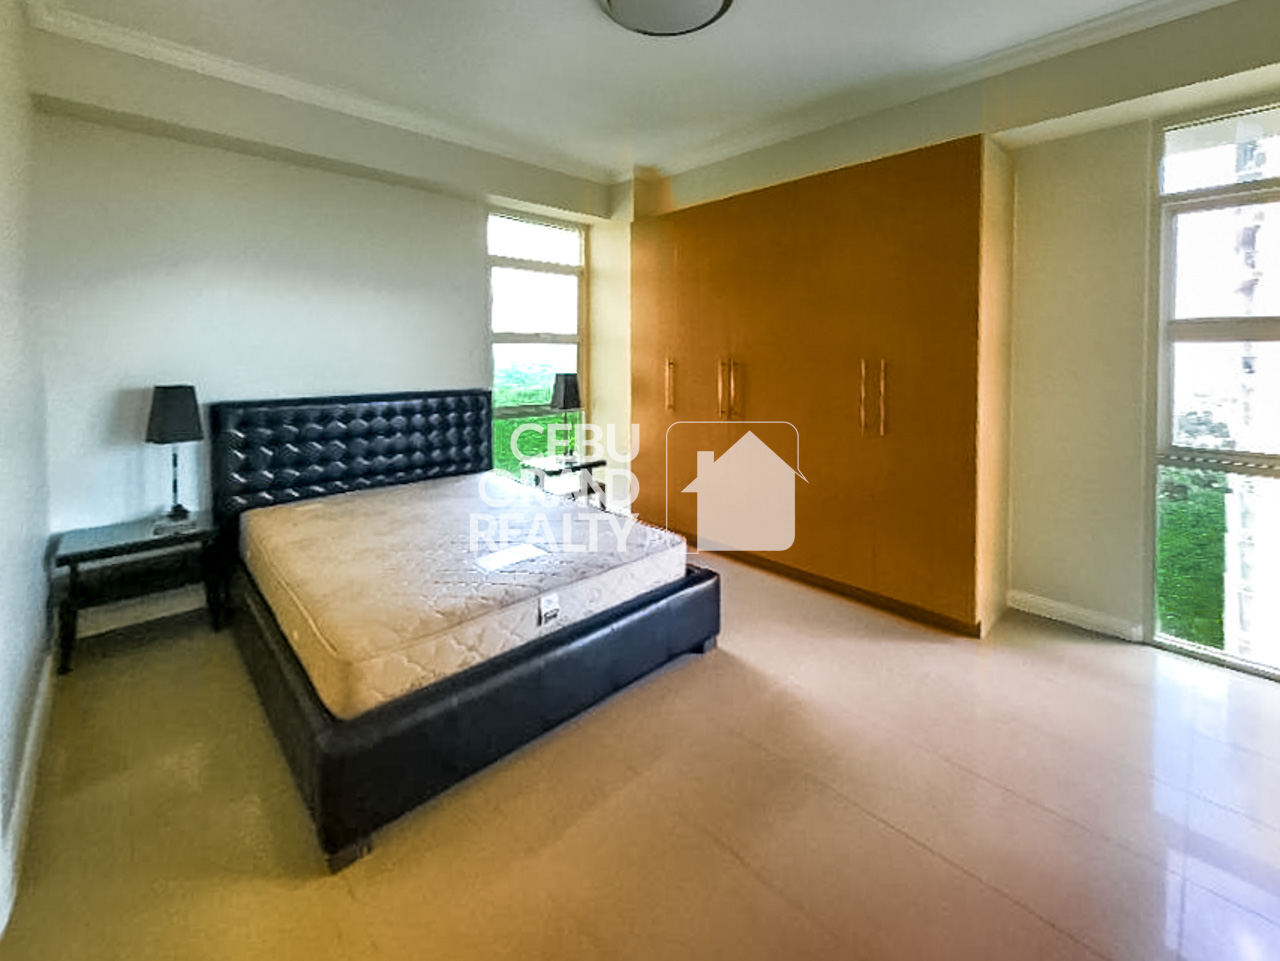 SRBCL9 Semi-Furnished 2 Bedroom Condo for Sale in Citylights Gardens - 11